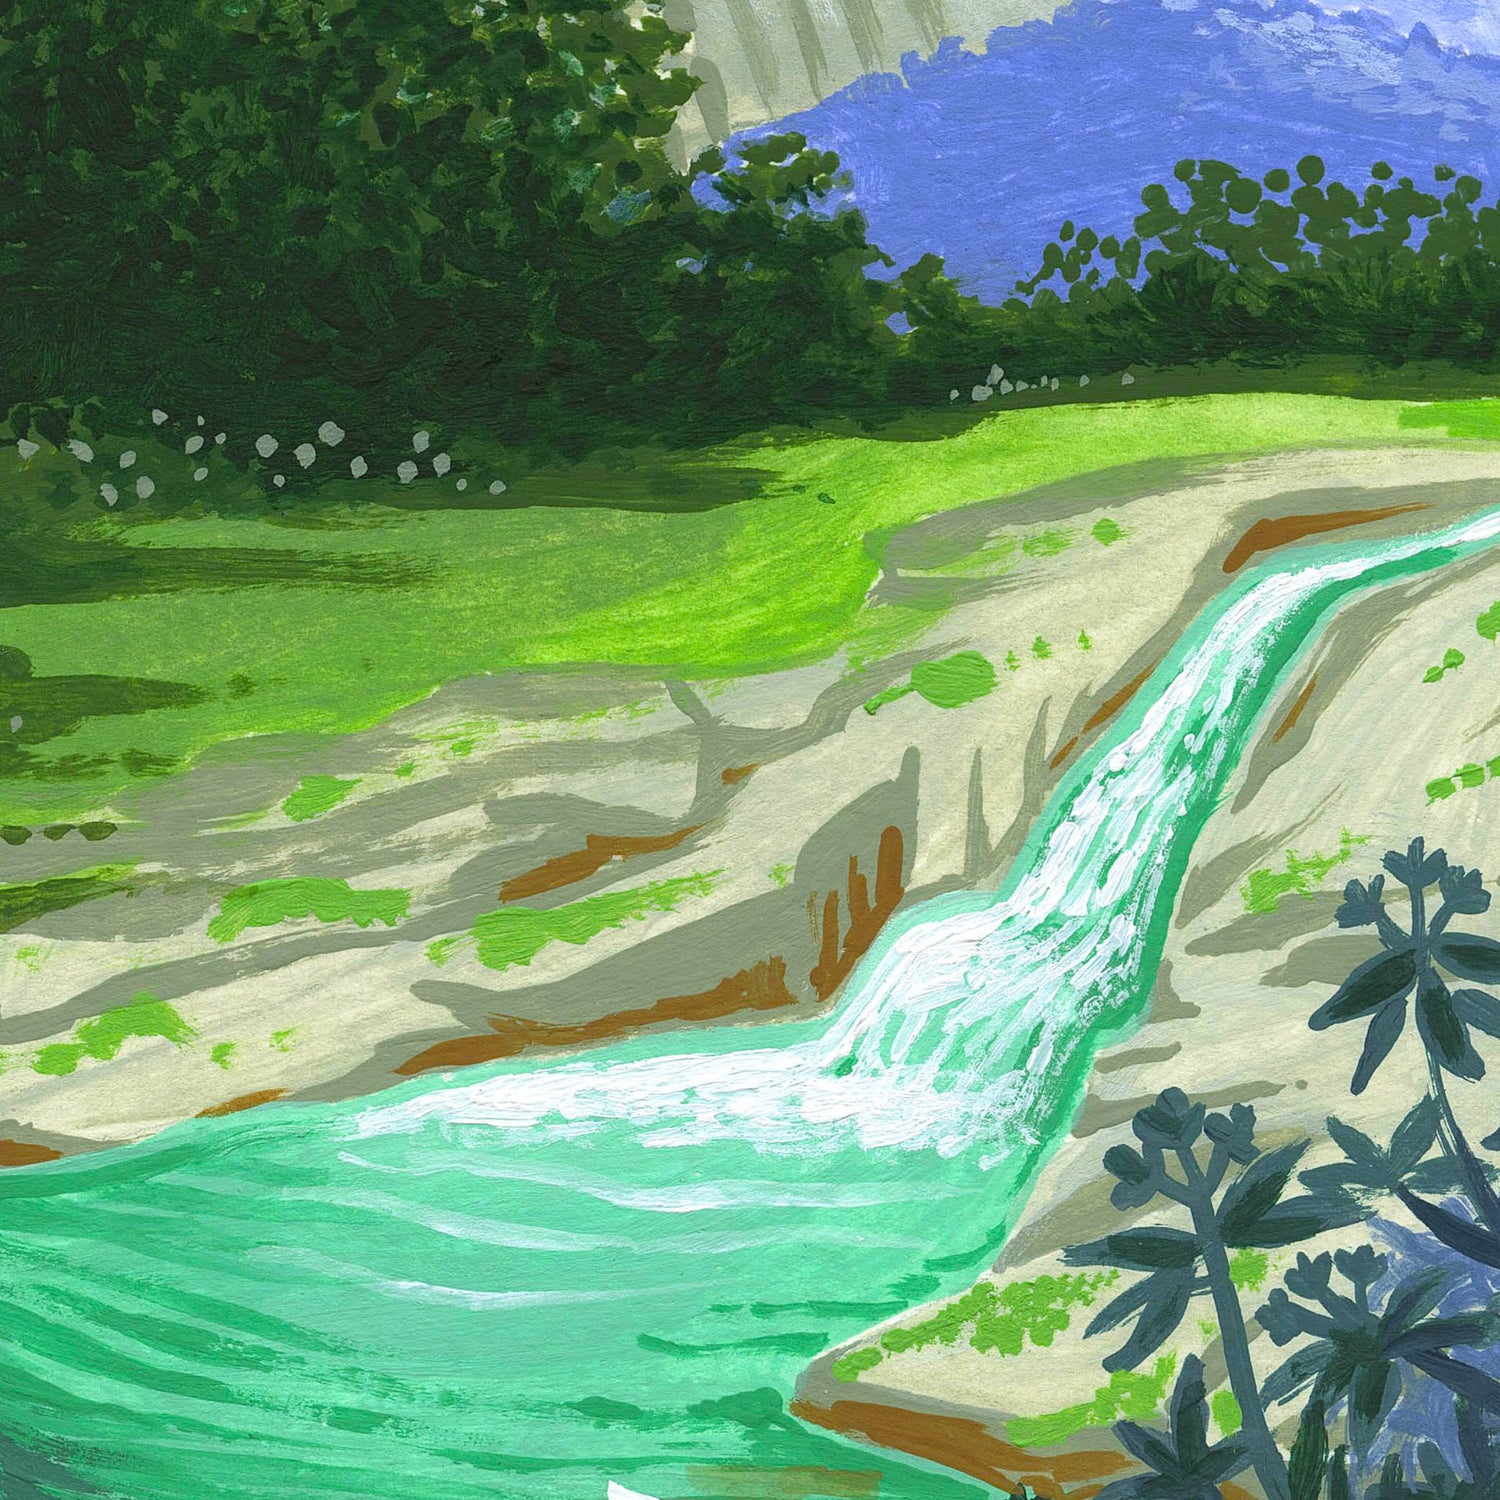 Pisgah National Forest art detail with Appalachian Mountains, waterfalls, and forests; trendy illustration by Angela Staehling